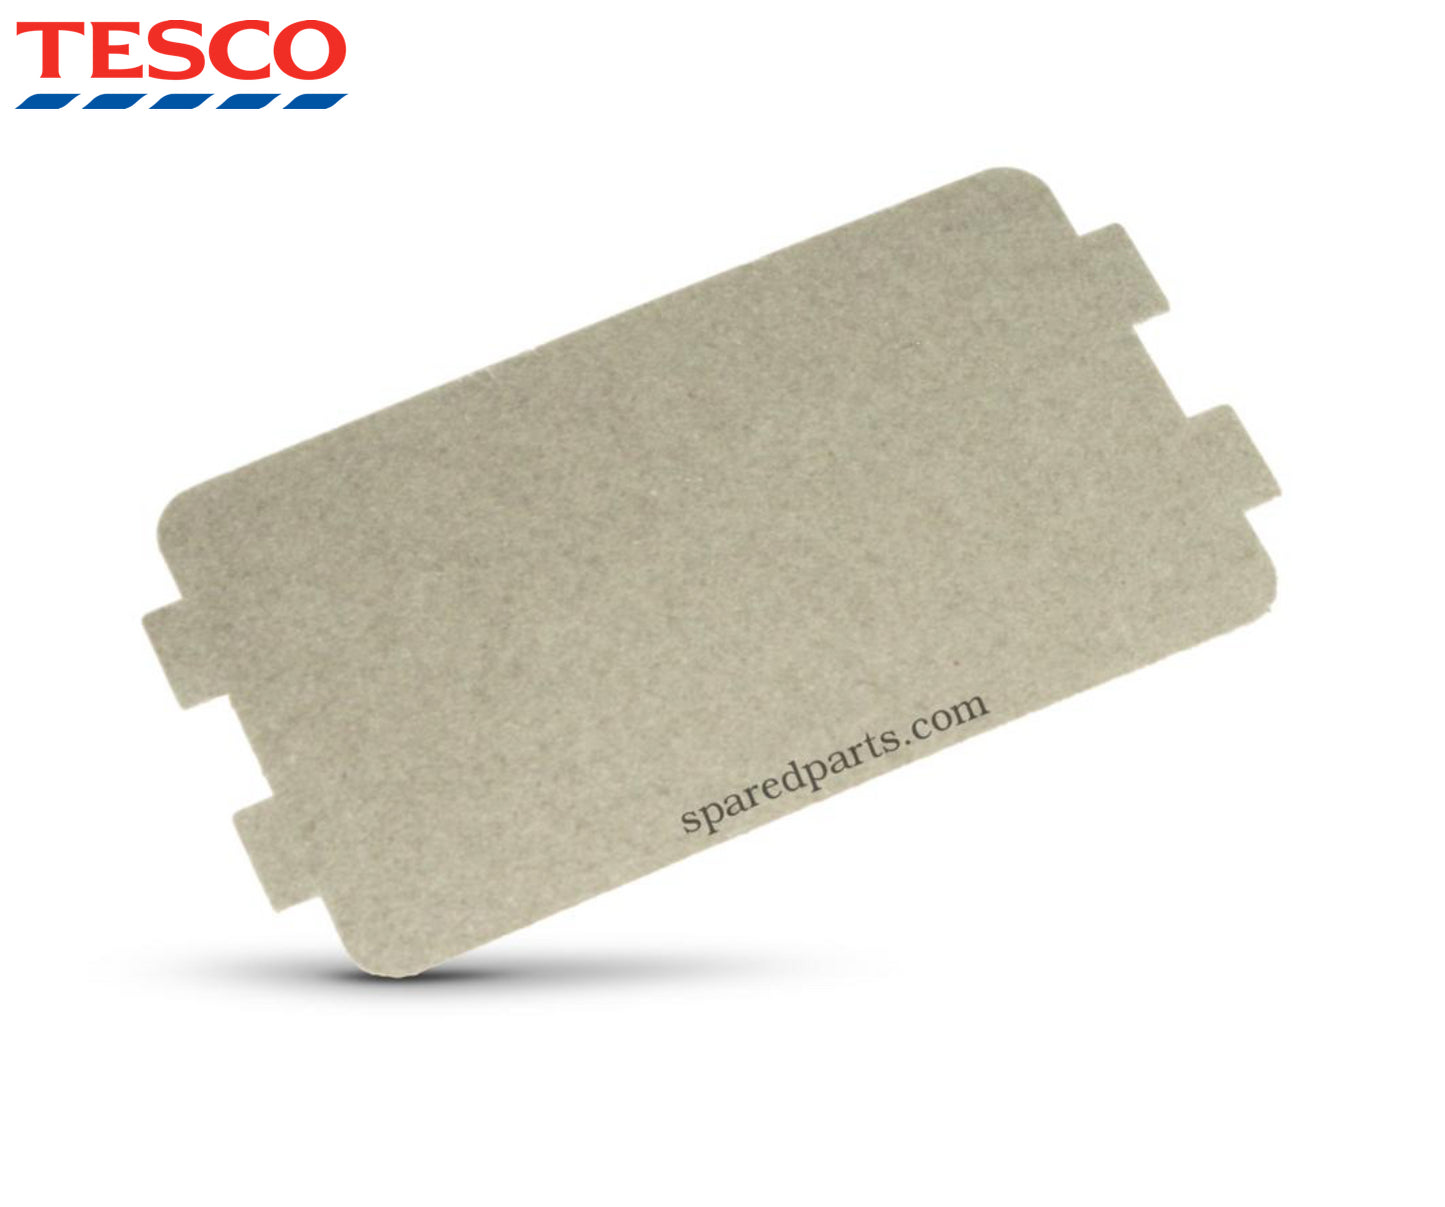 Tesco Microwave Wave Guard Cover